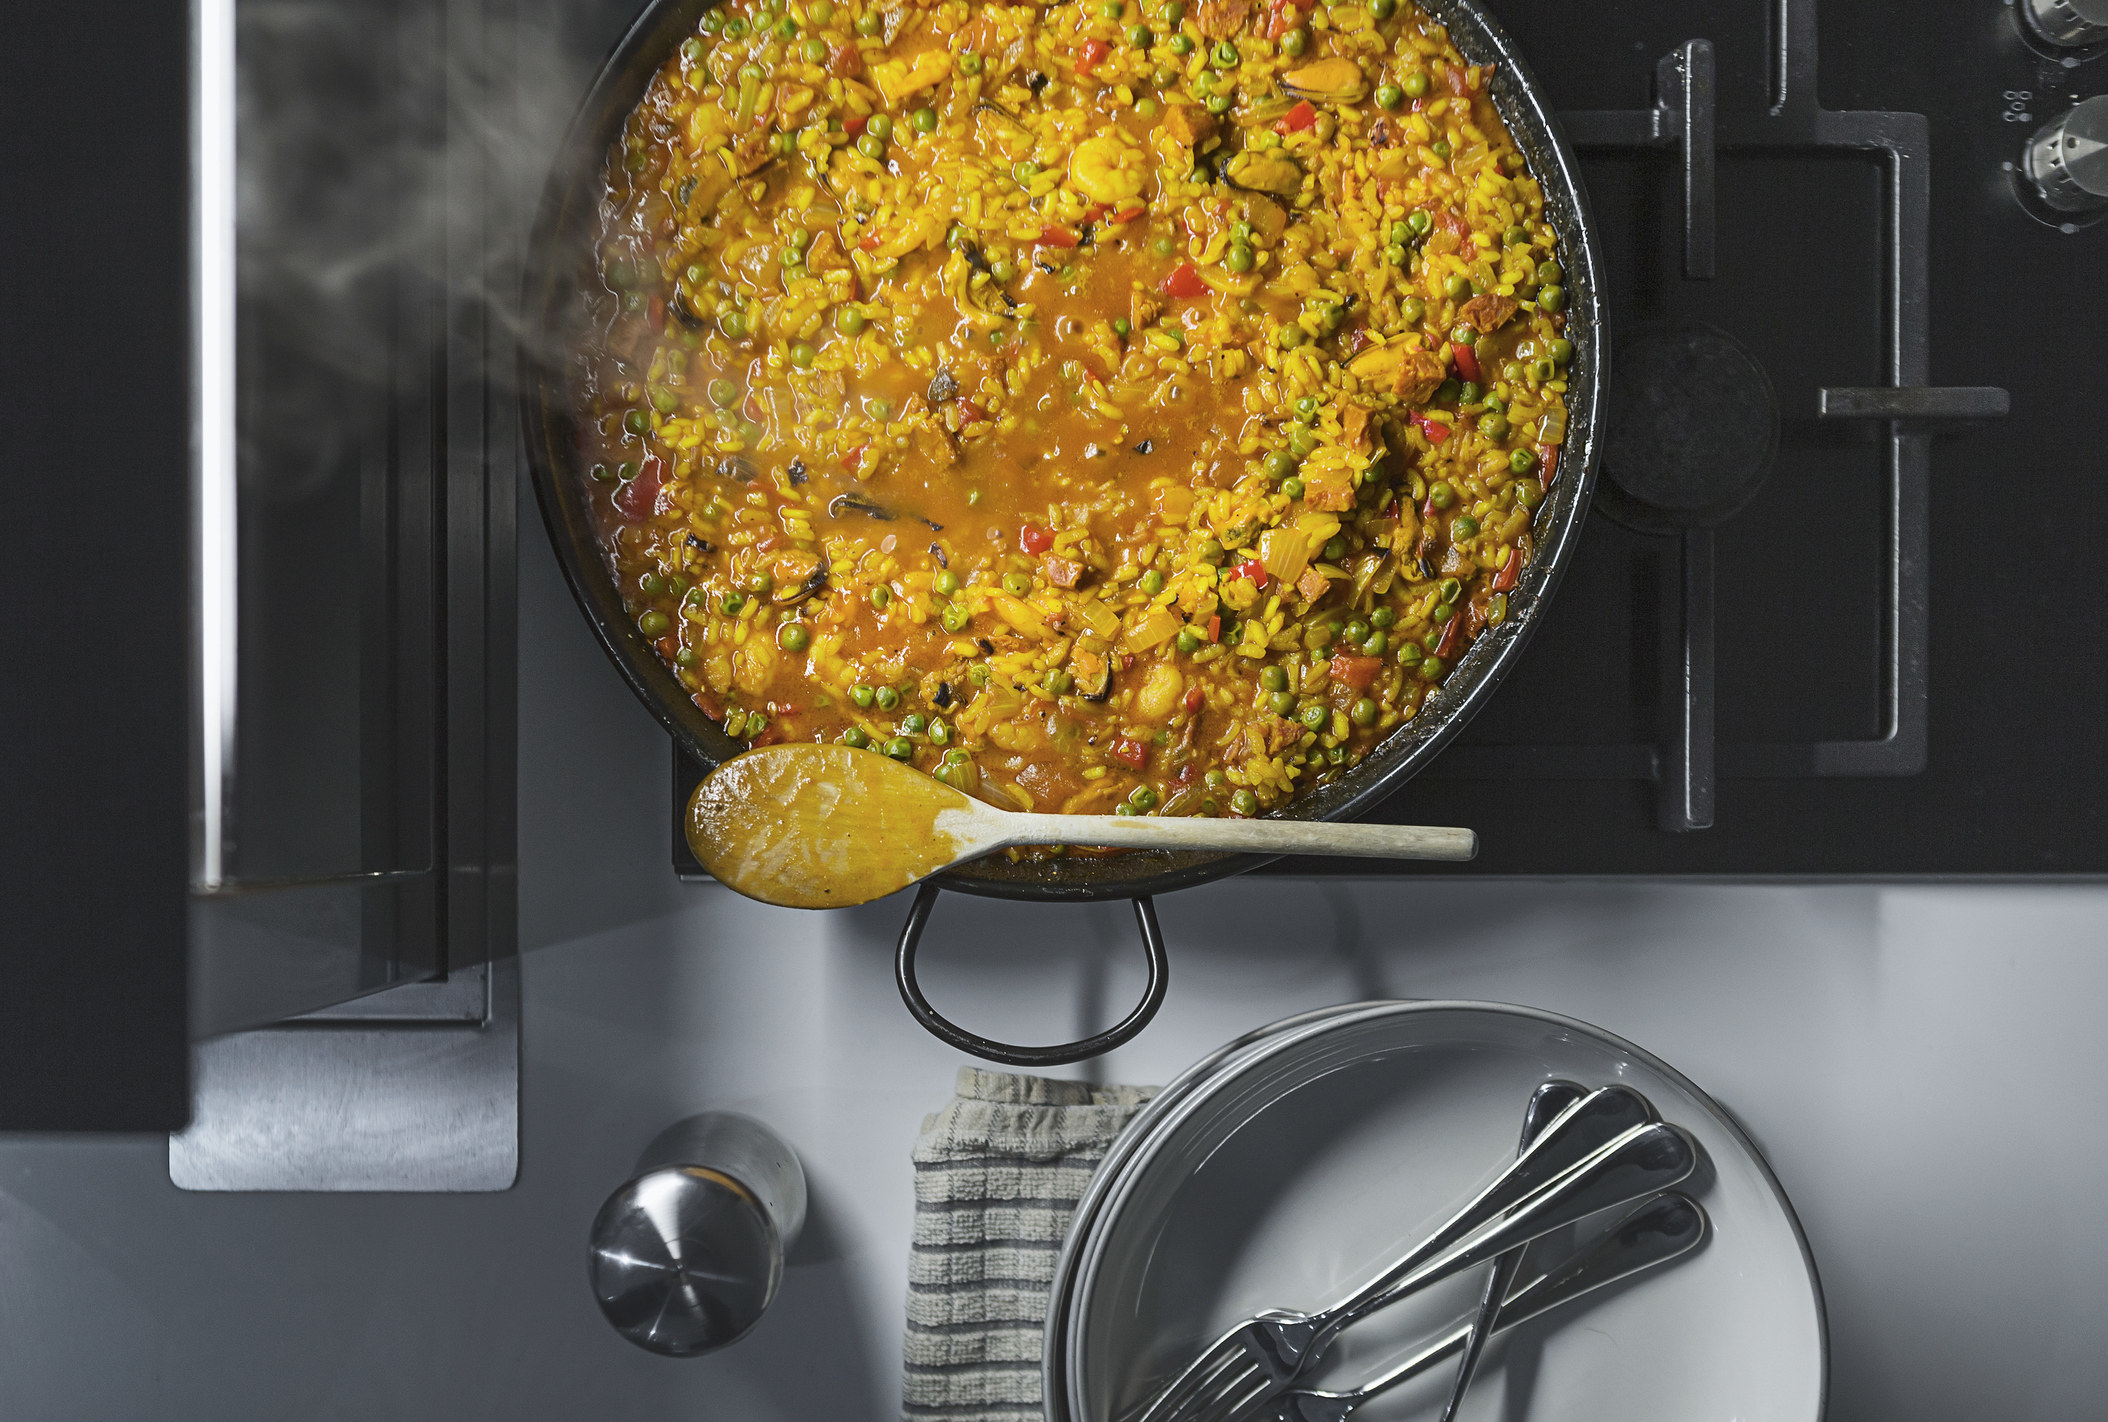 Cooking paella on the stovetop.